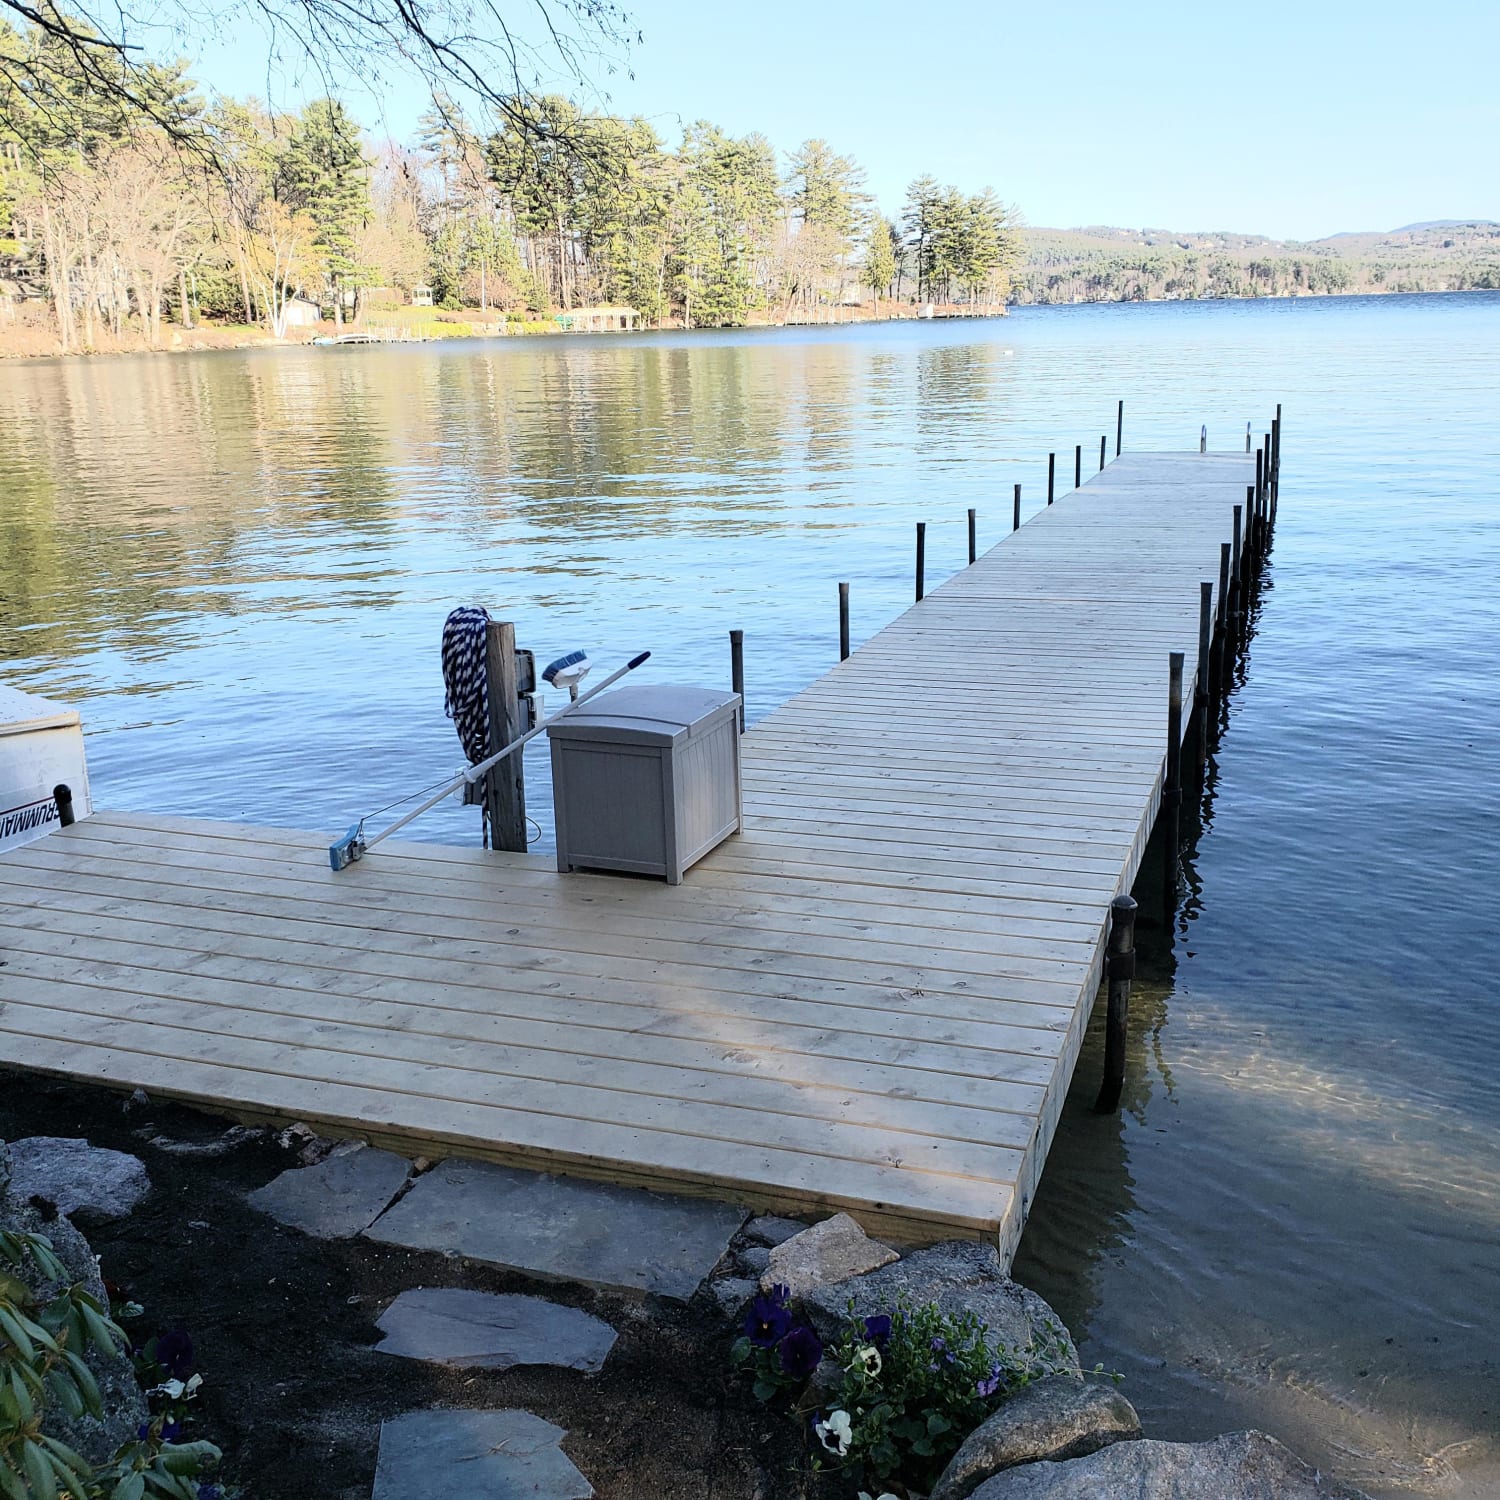 An ice dam destroyed my dock in January so i had to rebuild. Its not perfect and took me about 3 full weeks to get here. No real experience woodworking at all but needless to say I am pretty happy how it all turned out.